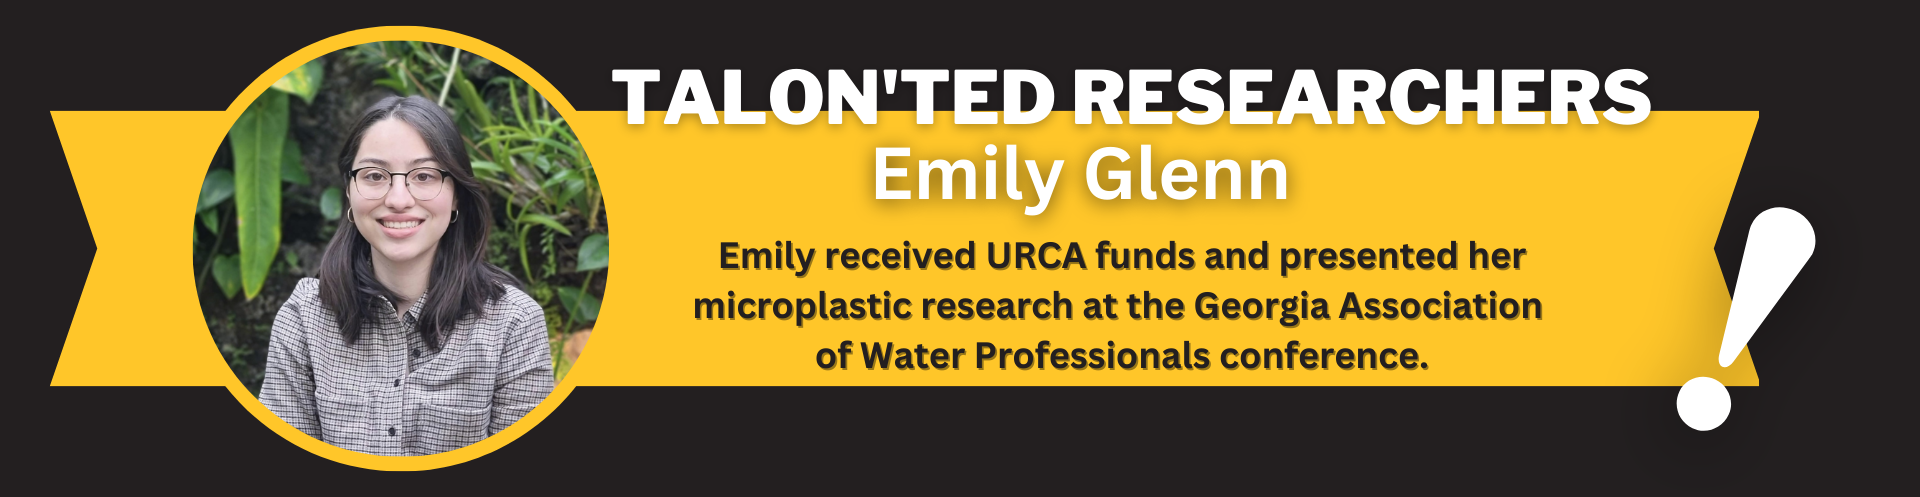 Click here to read more about Emily Glenn's research!